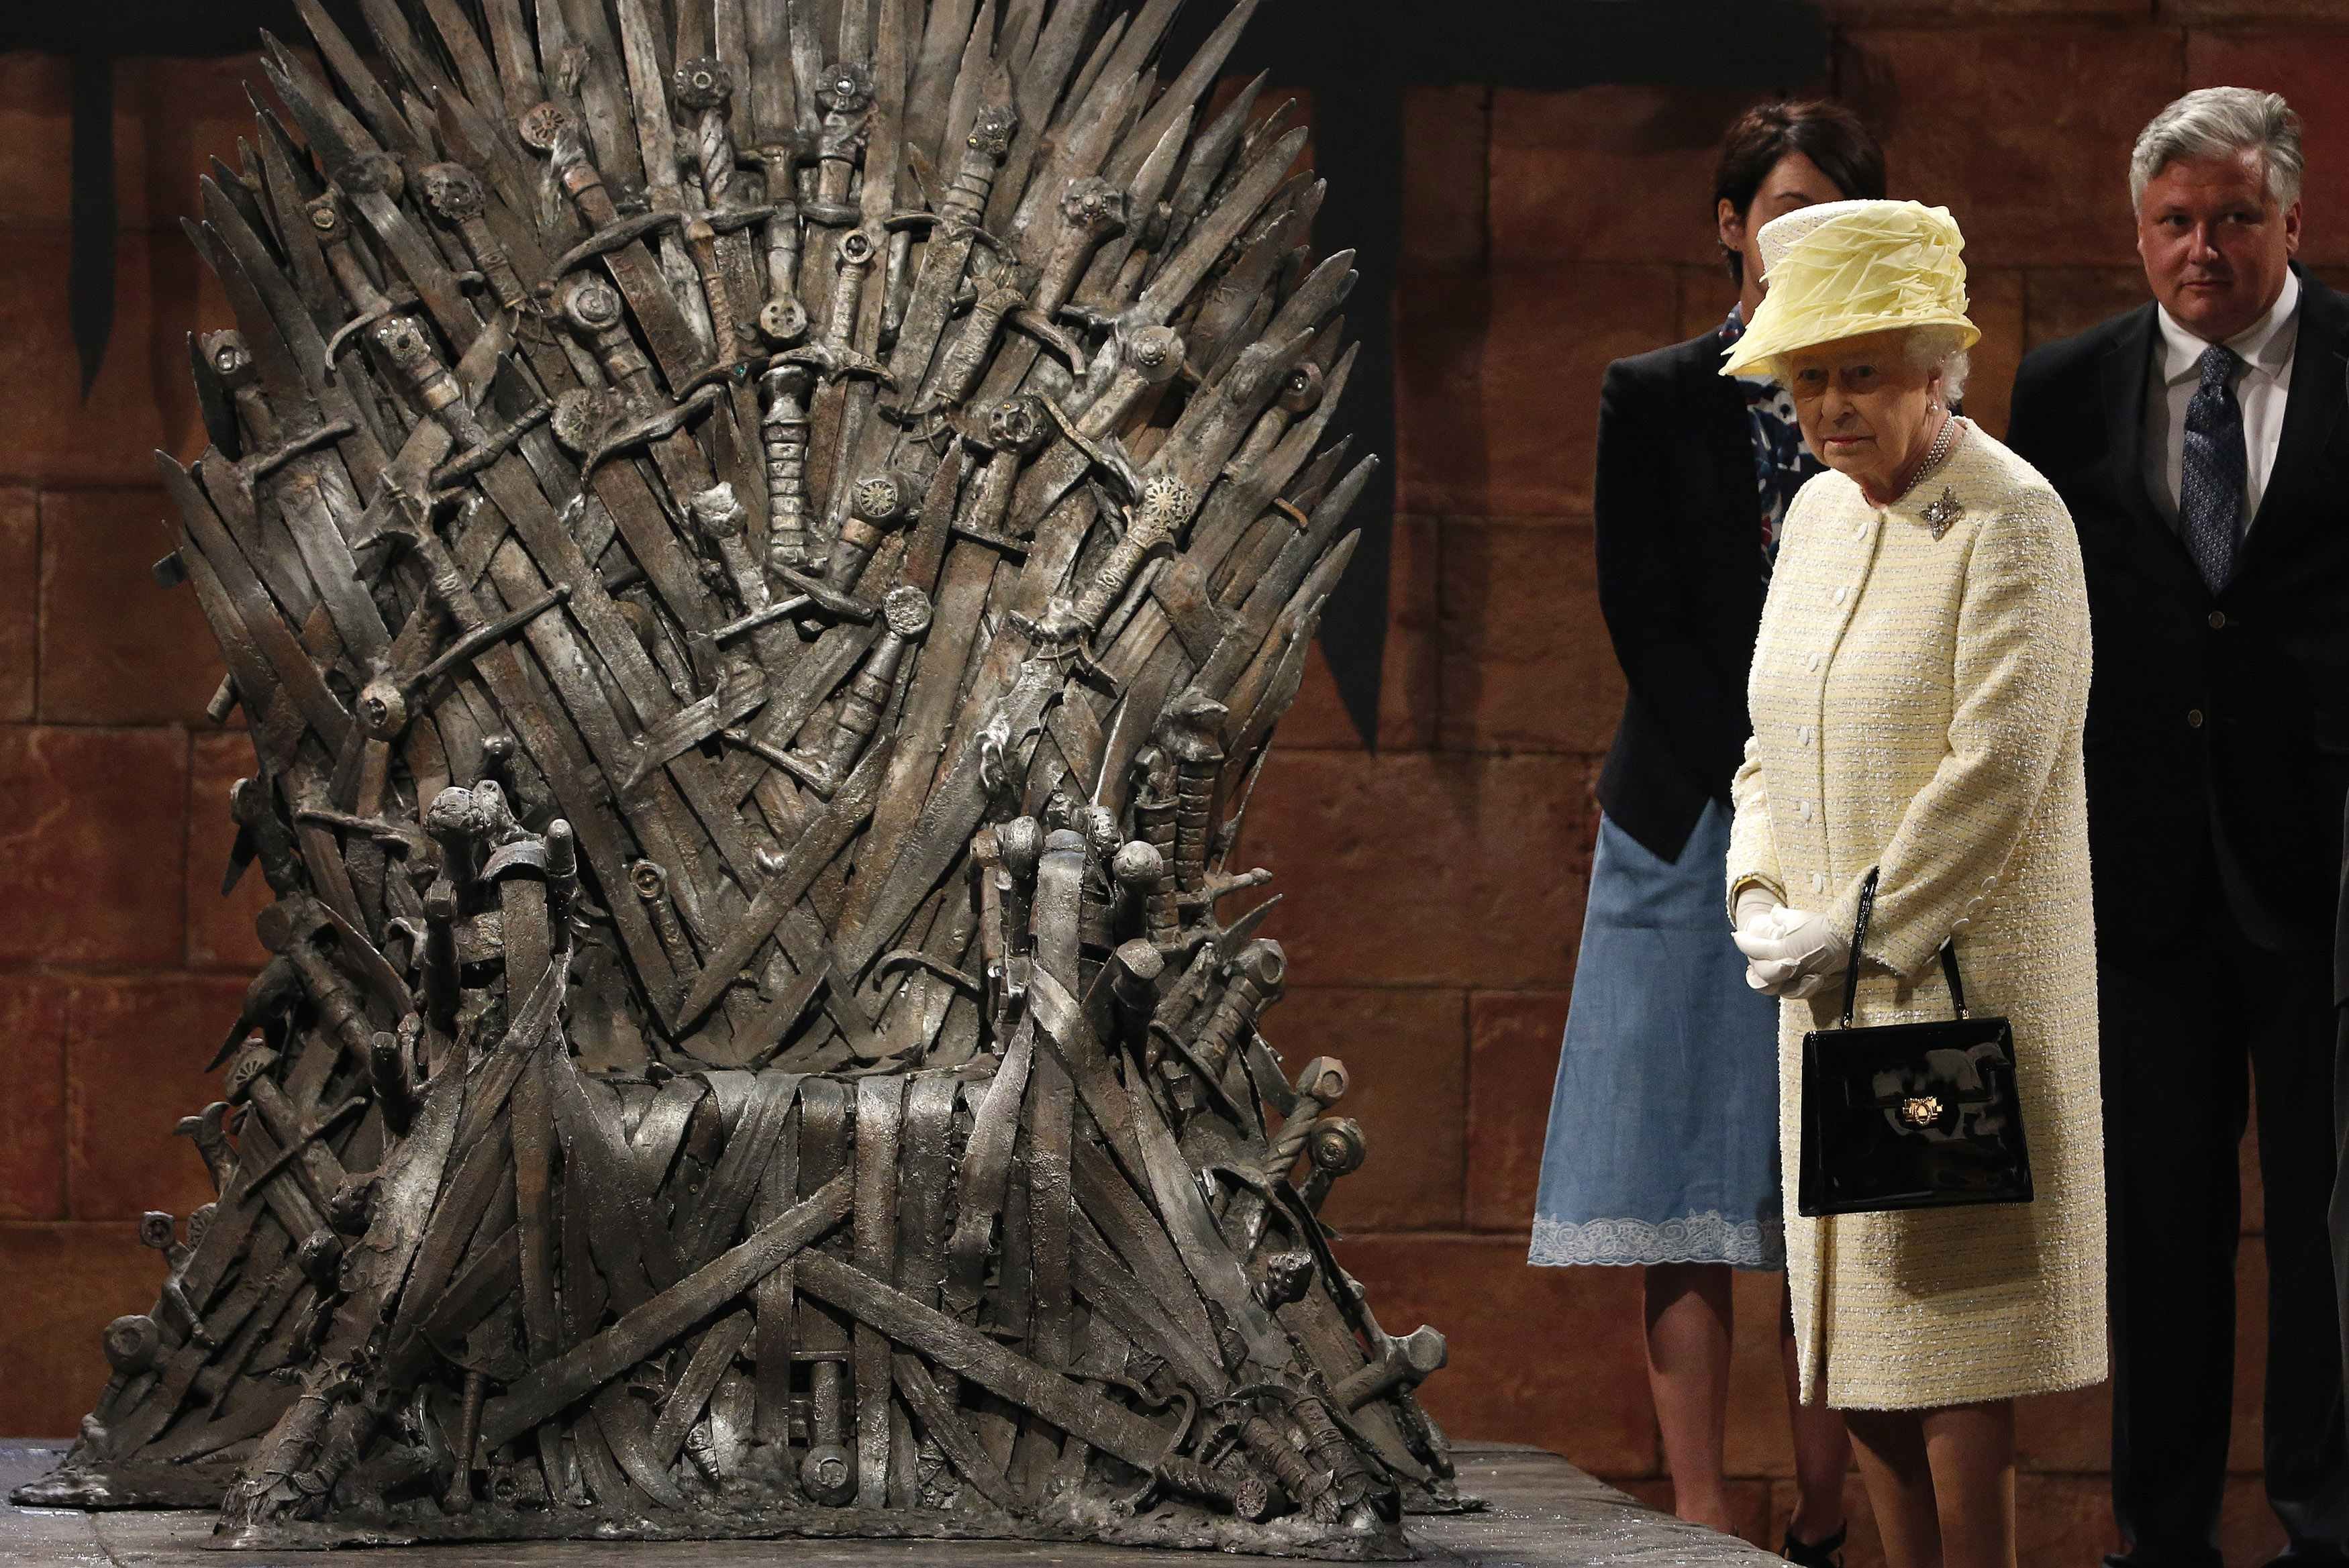 Britain's Queen Elizabeth looks at the Iron Throne as she meets members of the cast on the set of the television show Game of Thrones in the Titanic Quarter of Belfast, Northern Ireland, June 24, 2014.